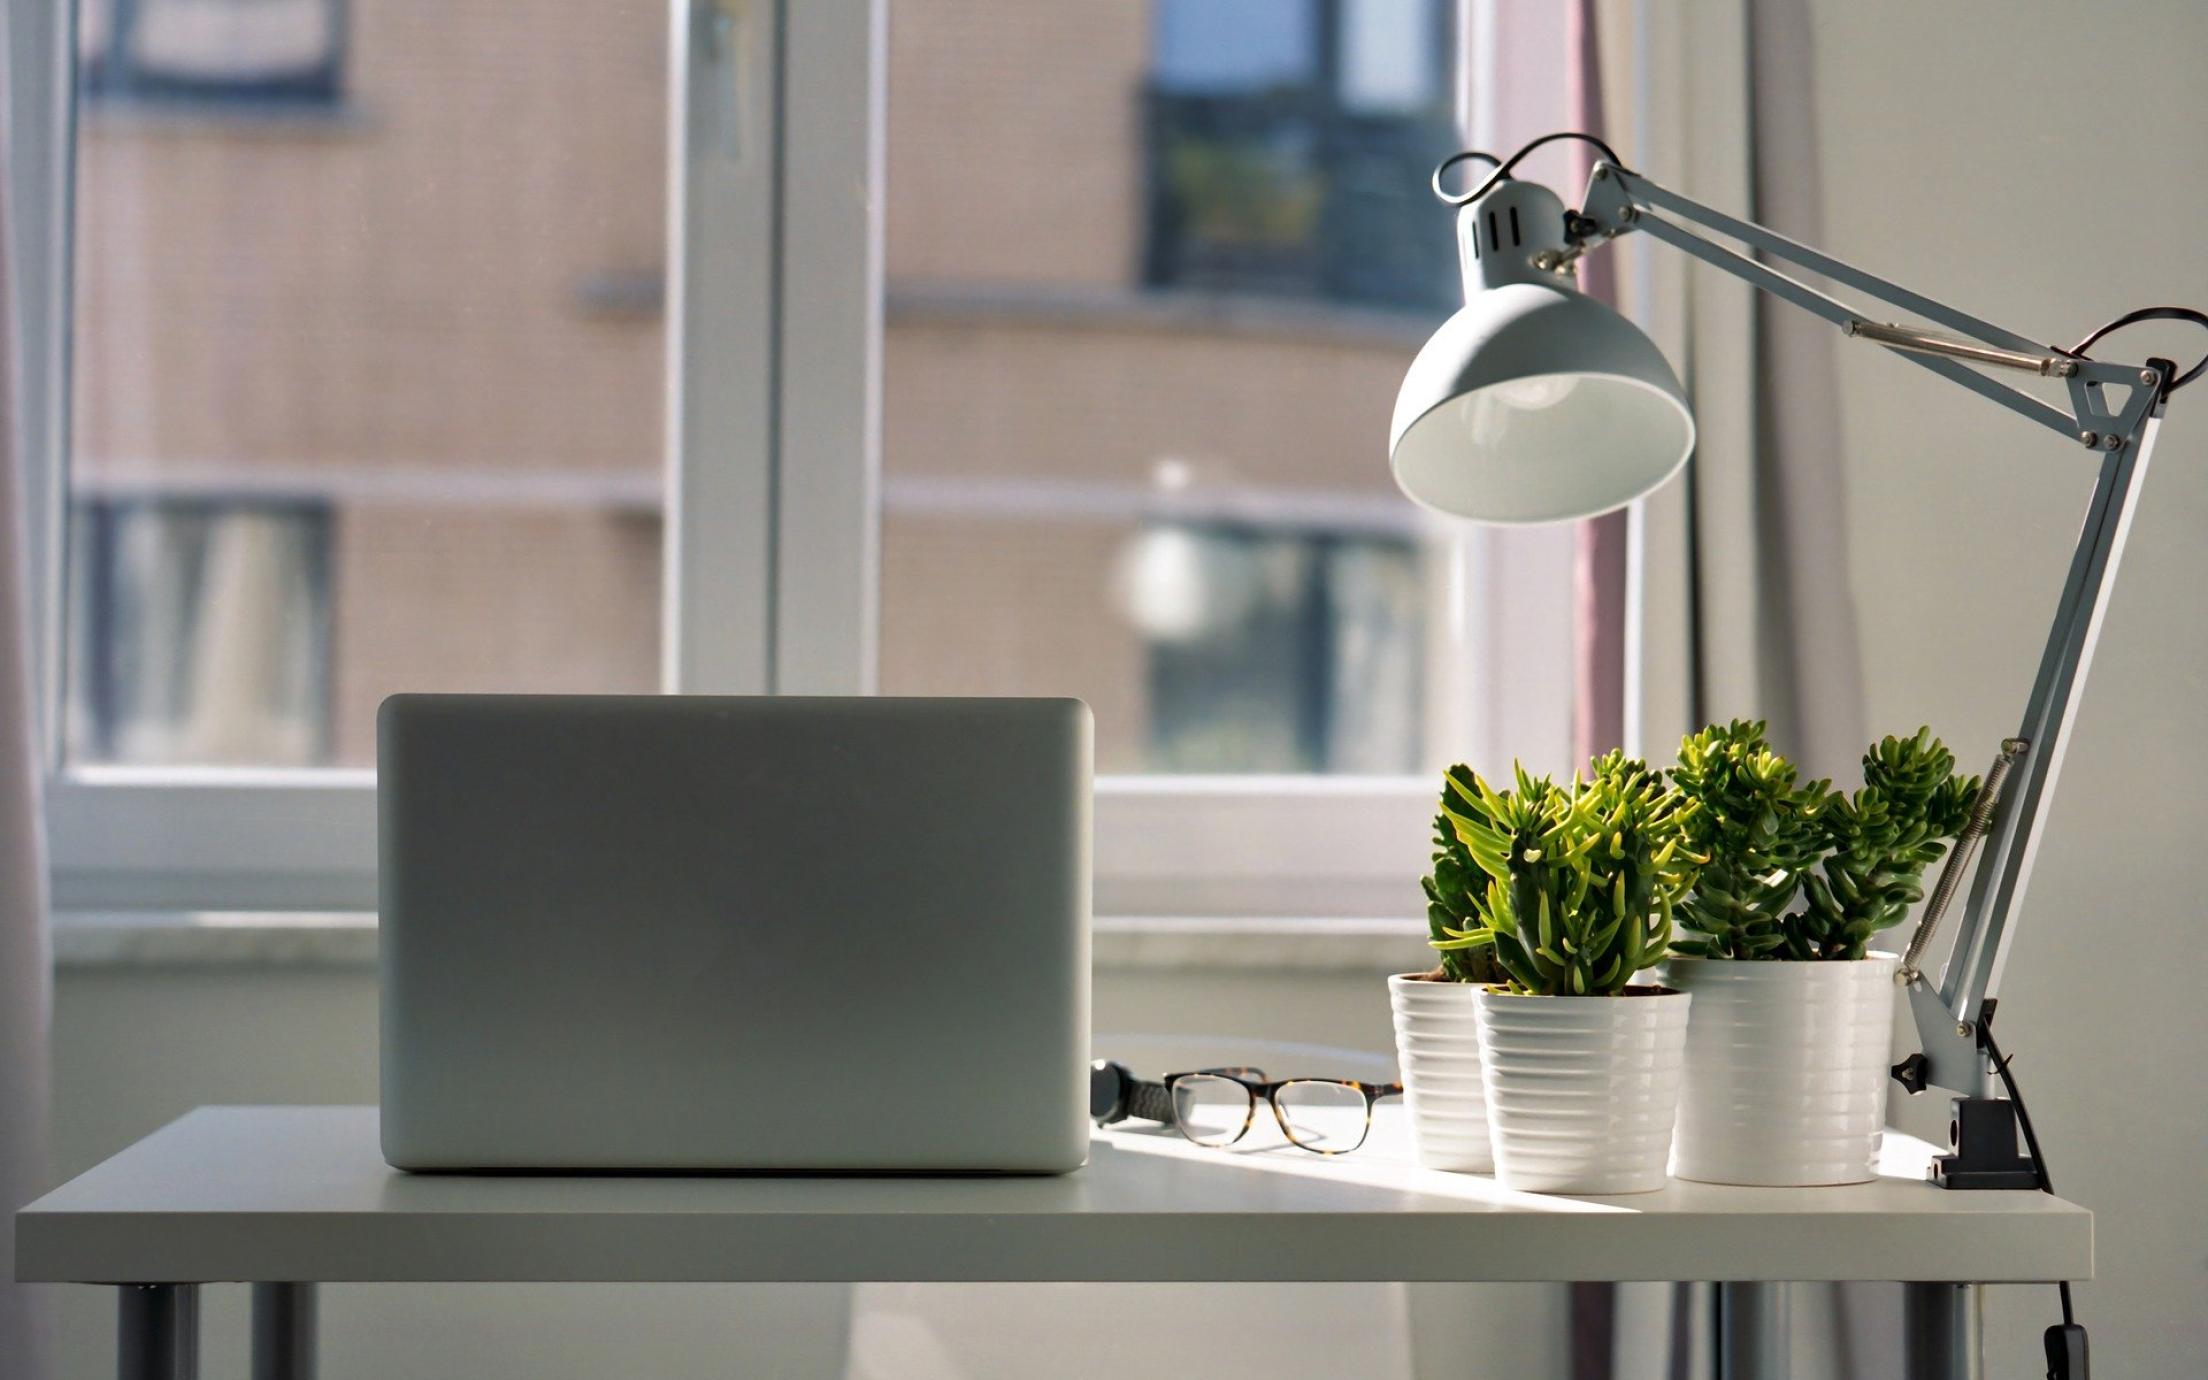 Photo of a desk with natural light coming in from a window and plants sitting on the desk